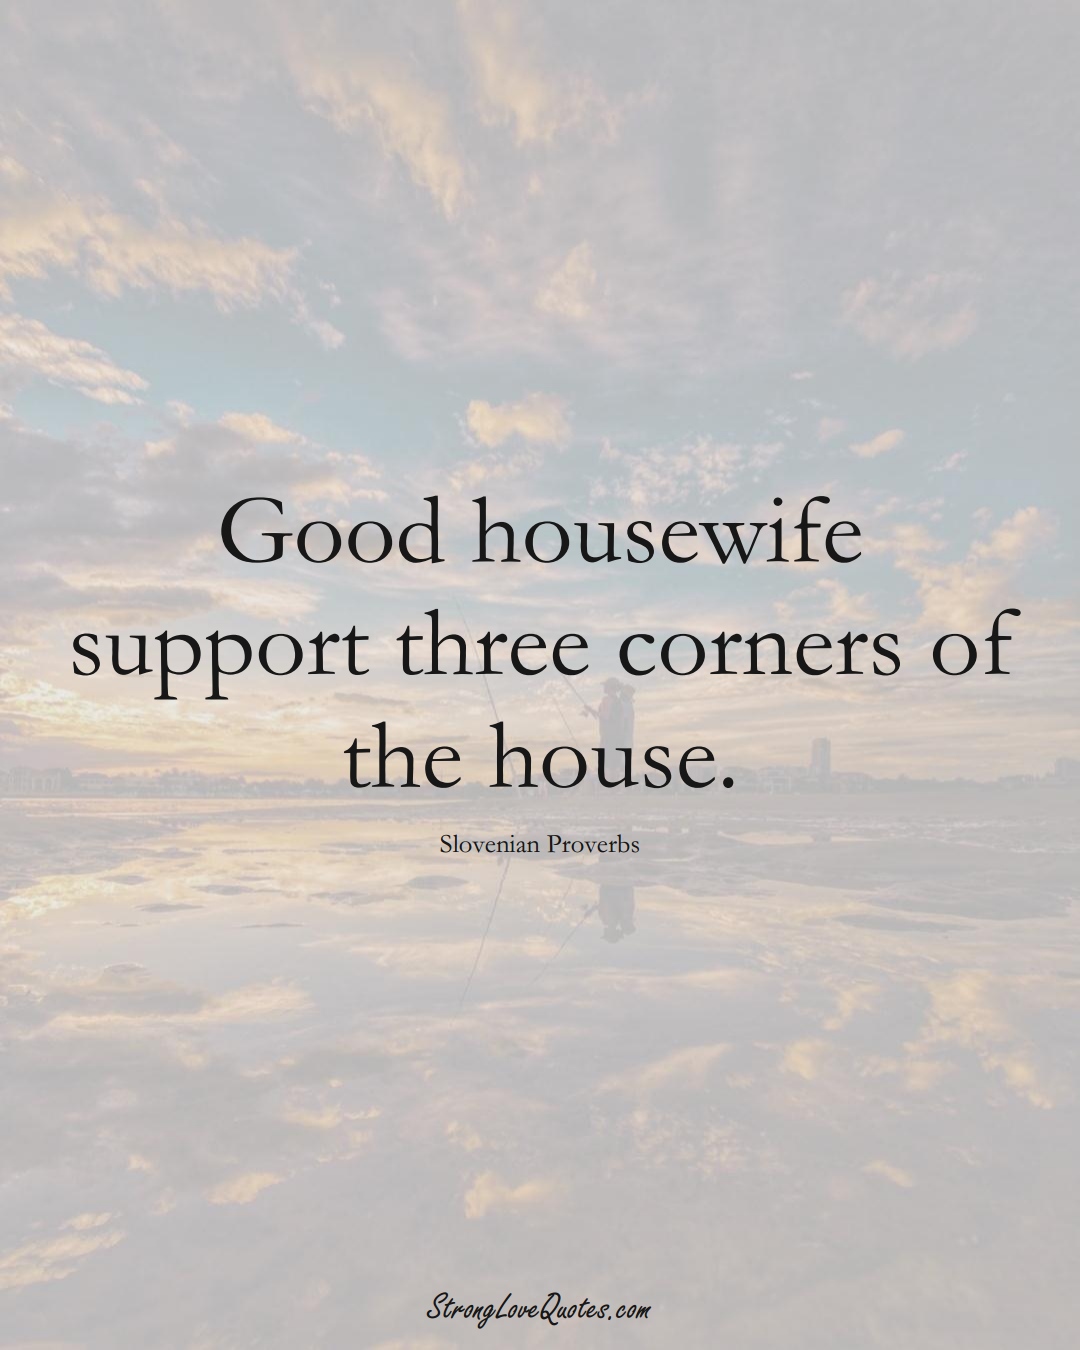 Good housewife support three corners of the house. (Slovenian Sayings);  #EuropeanSayings